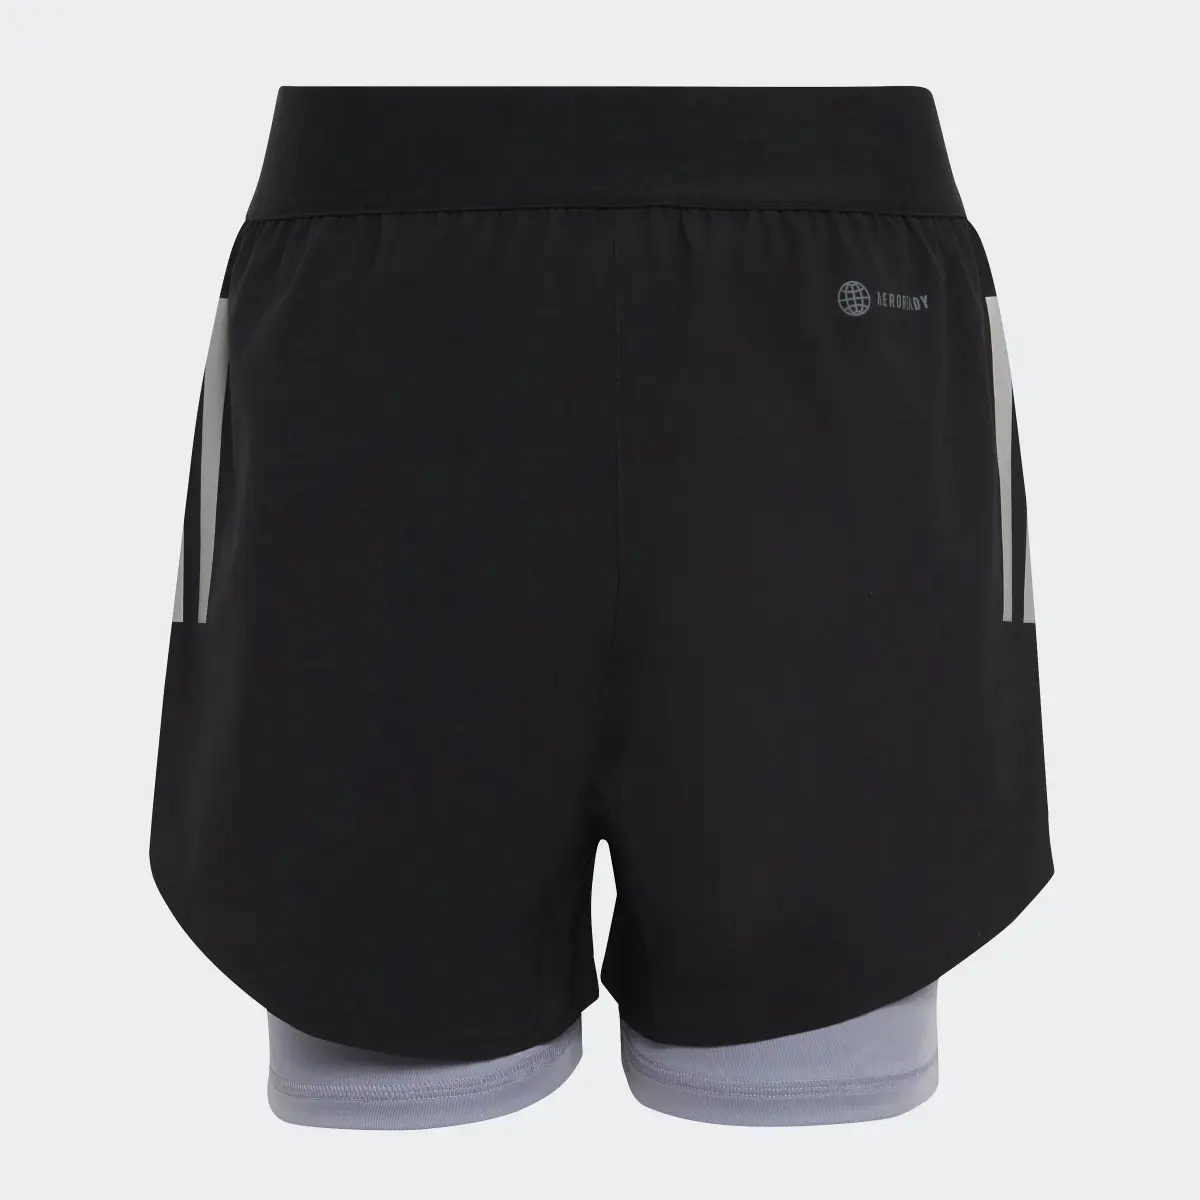 Adidas Short Two-In-One AEROREADY Woven. 2